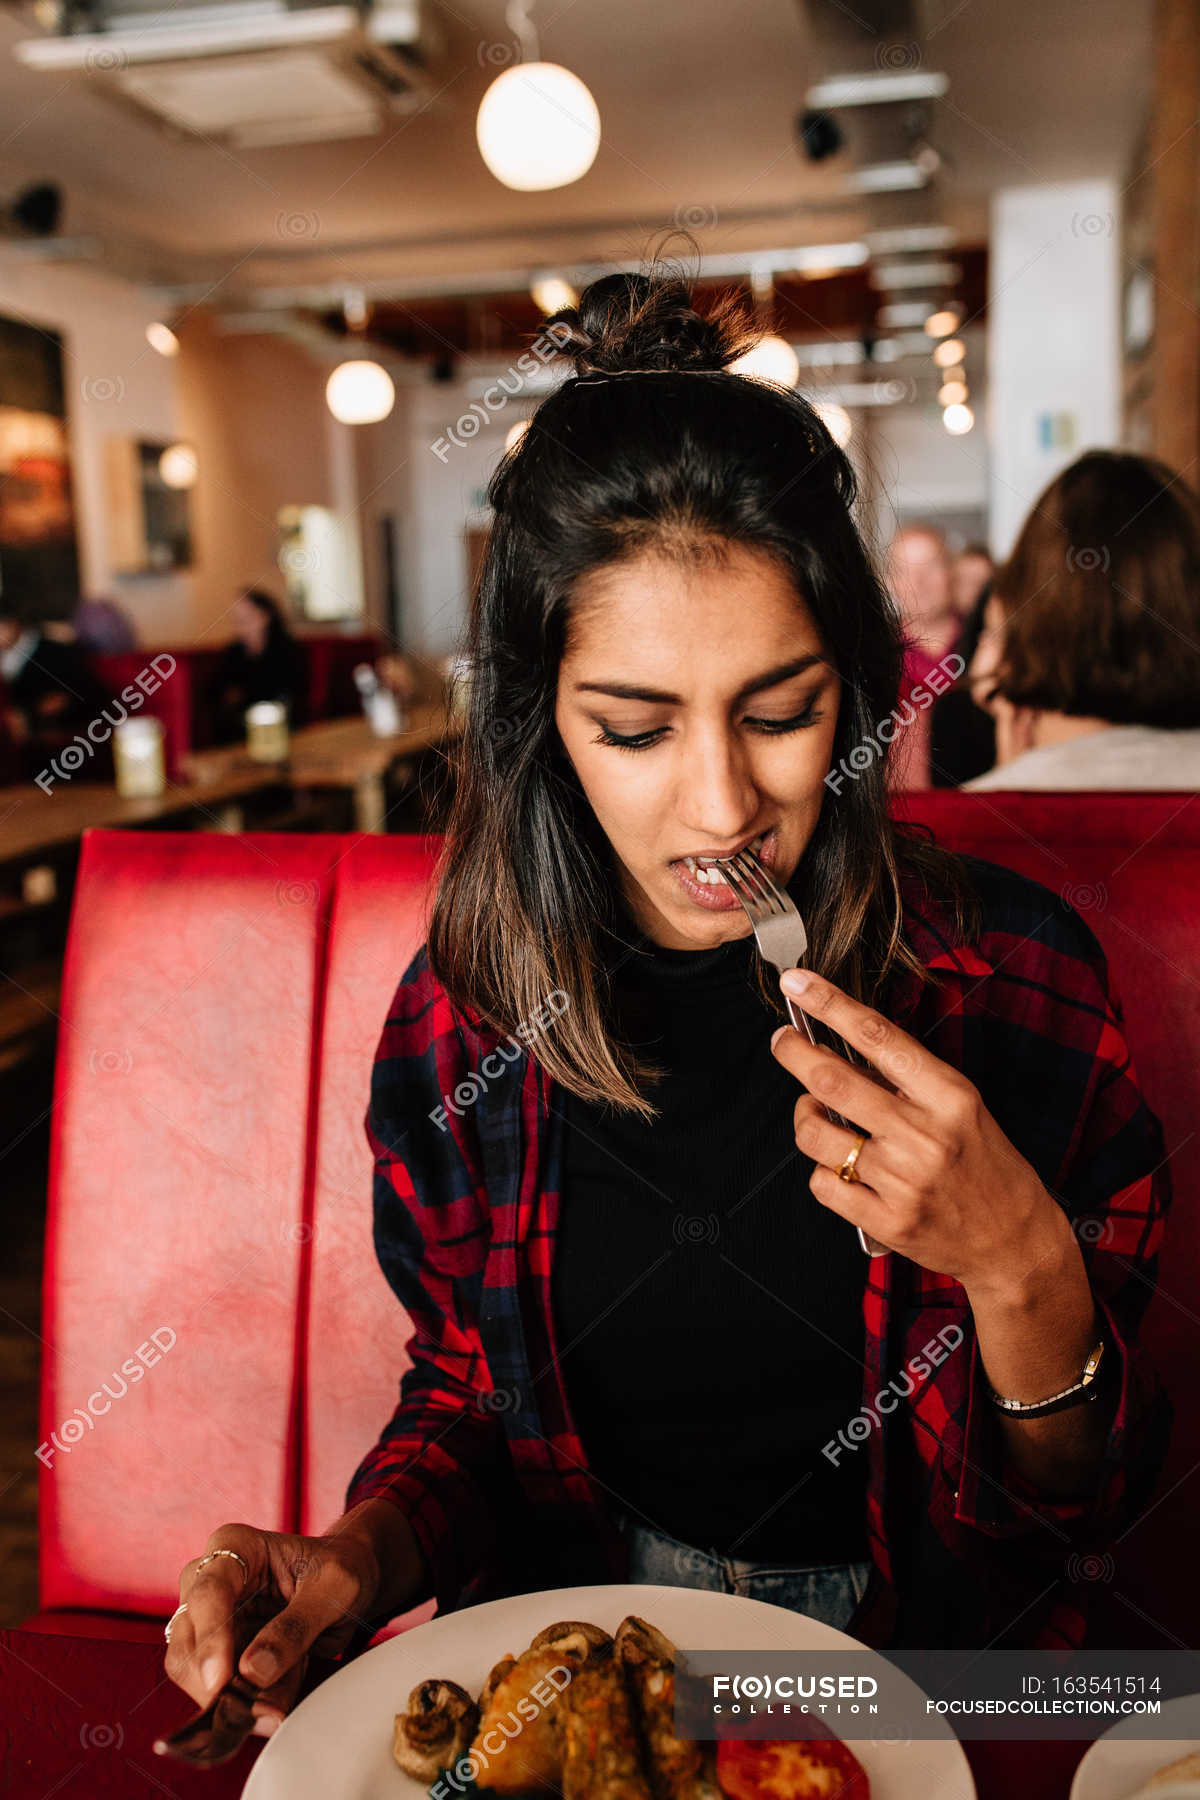 Eating Out Girl